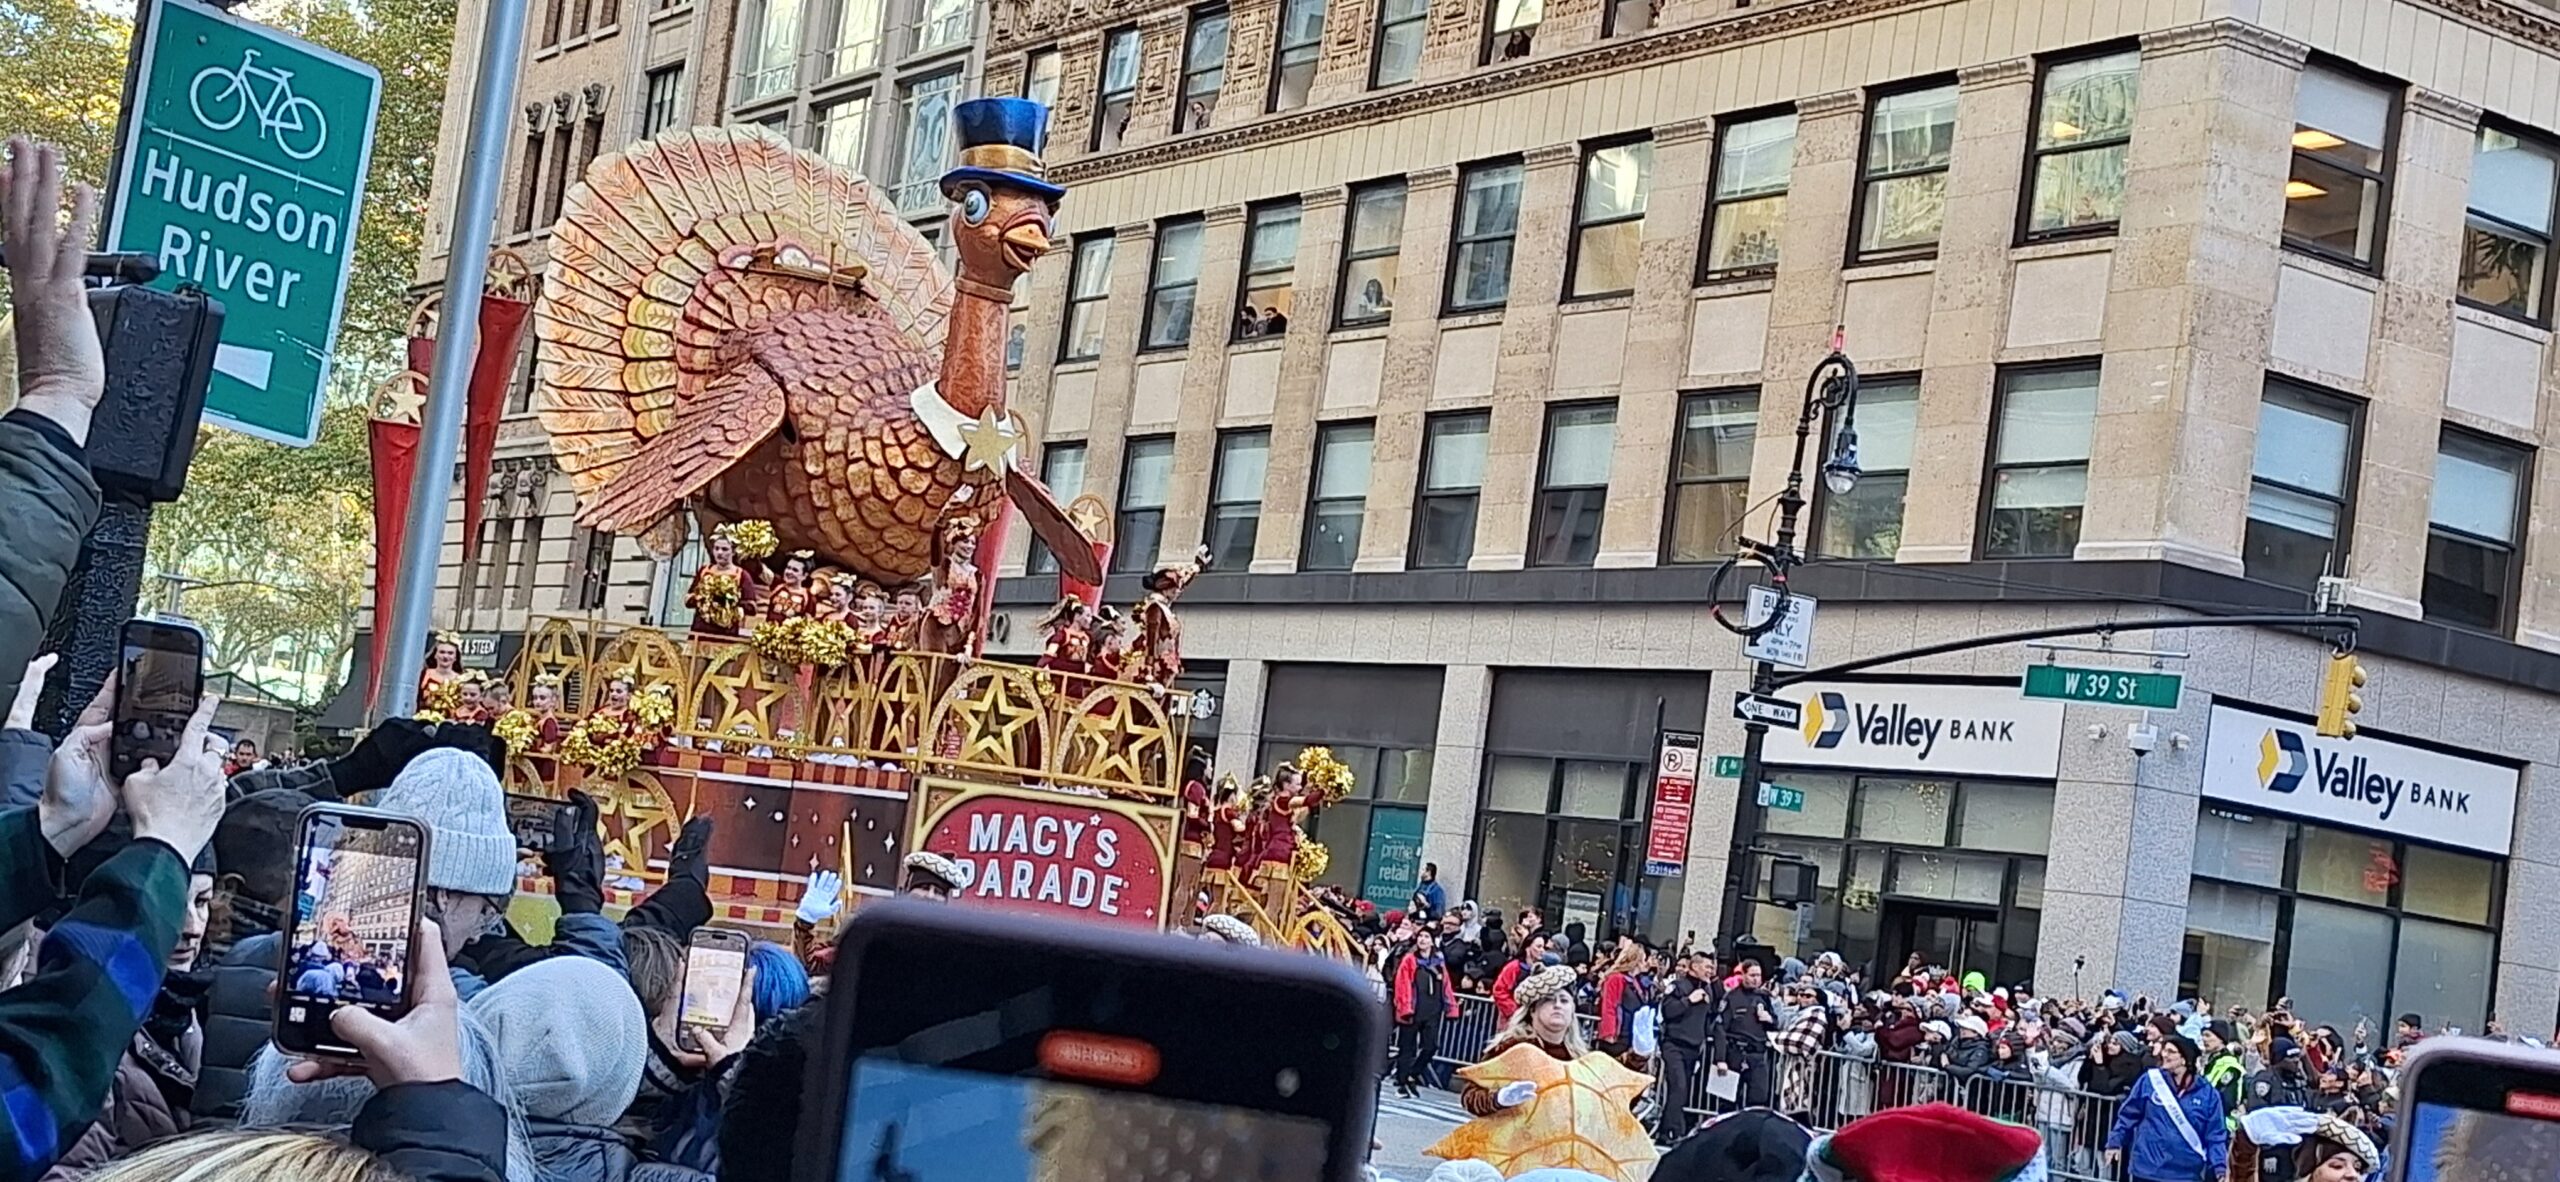 a large parade float with a large bird on top